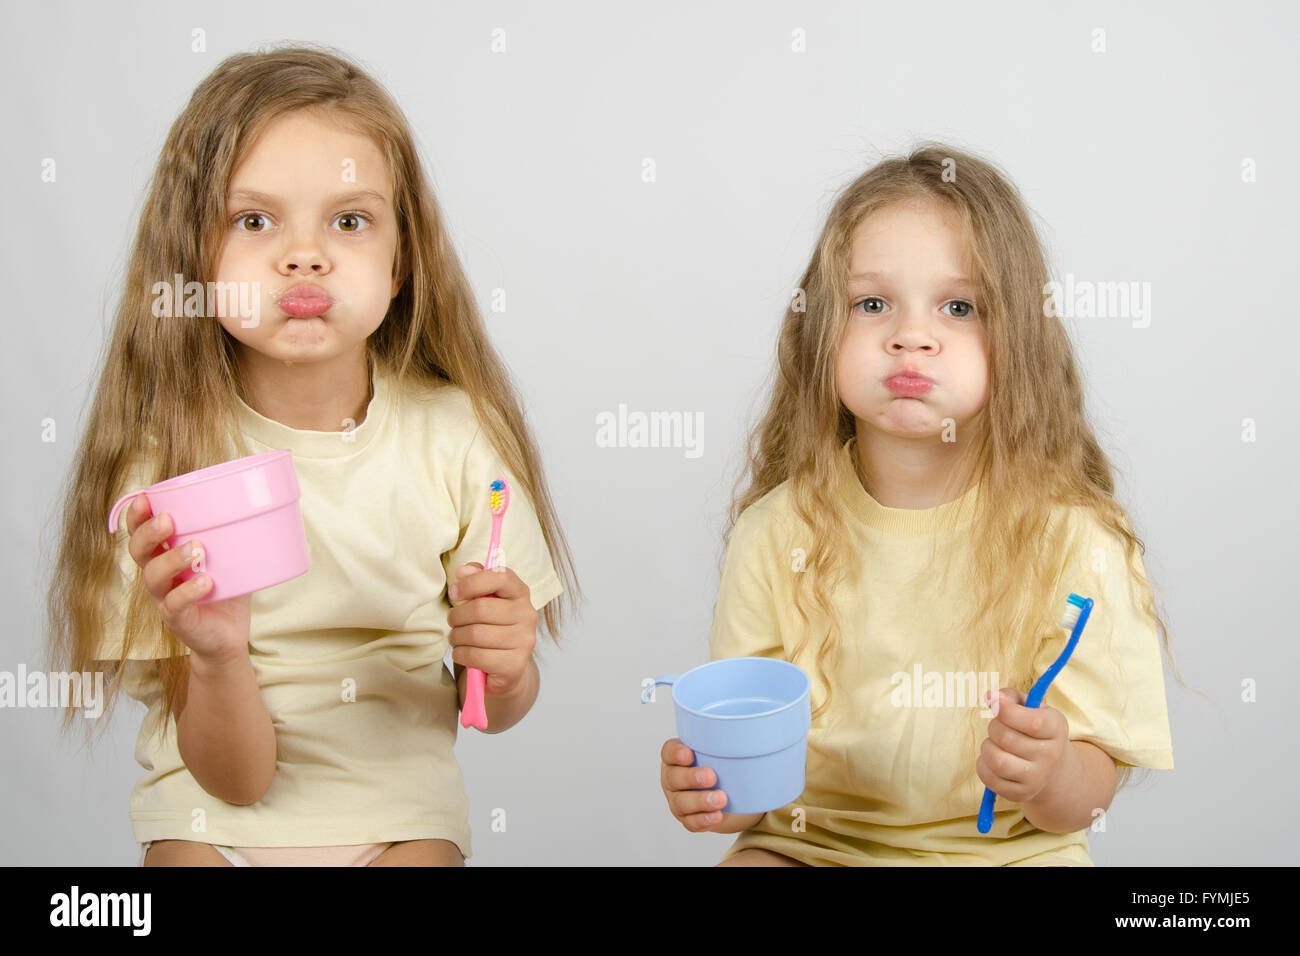 Two sisters Rinse your mouth brush your teeth Stock Photo